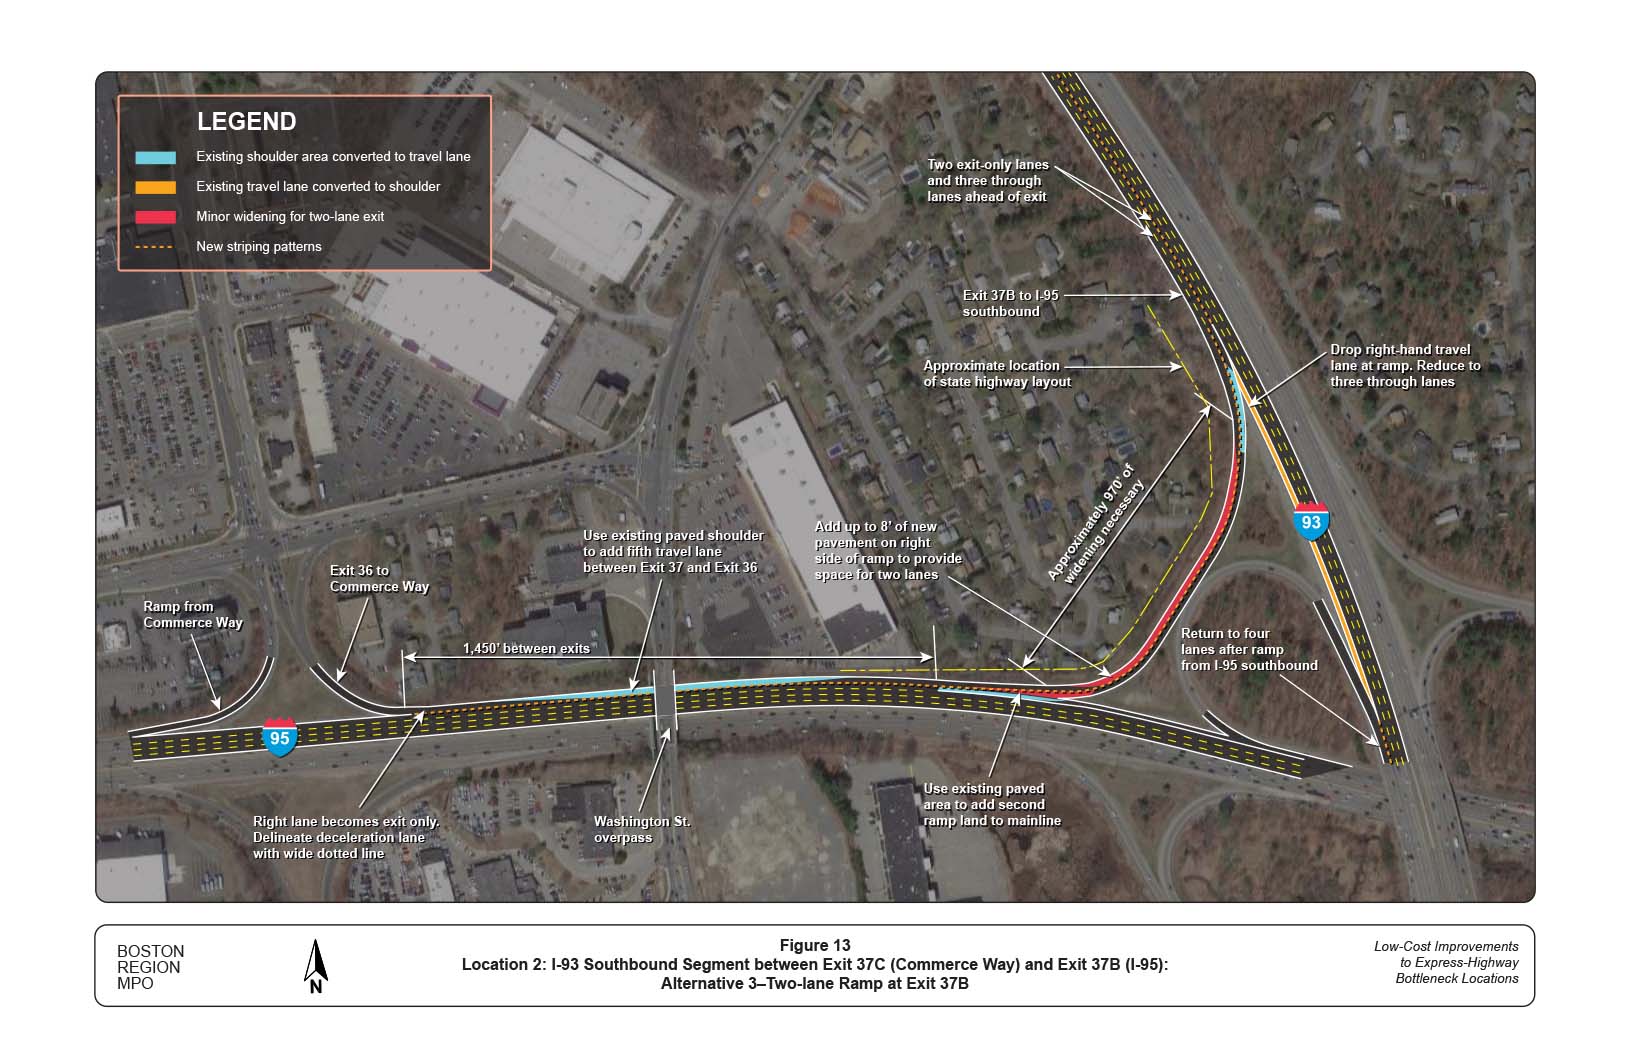 FIGURE 13. Location 2: I-93 Southbound Segment between Exit 37C (Commerce Way) and Exit 37B (I-95): Alternative 3–Two-Lane Ramp at Exit 37B
Figure 13 shows the improvements recommended in Alternative 3, which include creating an auxiliary lane, using a two-lane exit, dropping the rightmost lane for the bridge over I-95 and re-add the lane at the merge from I-95 southbound, and using existing shoulder space to widen the freeway to five lanes between exits 37 and 36 on 1-95 southbound.
